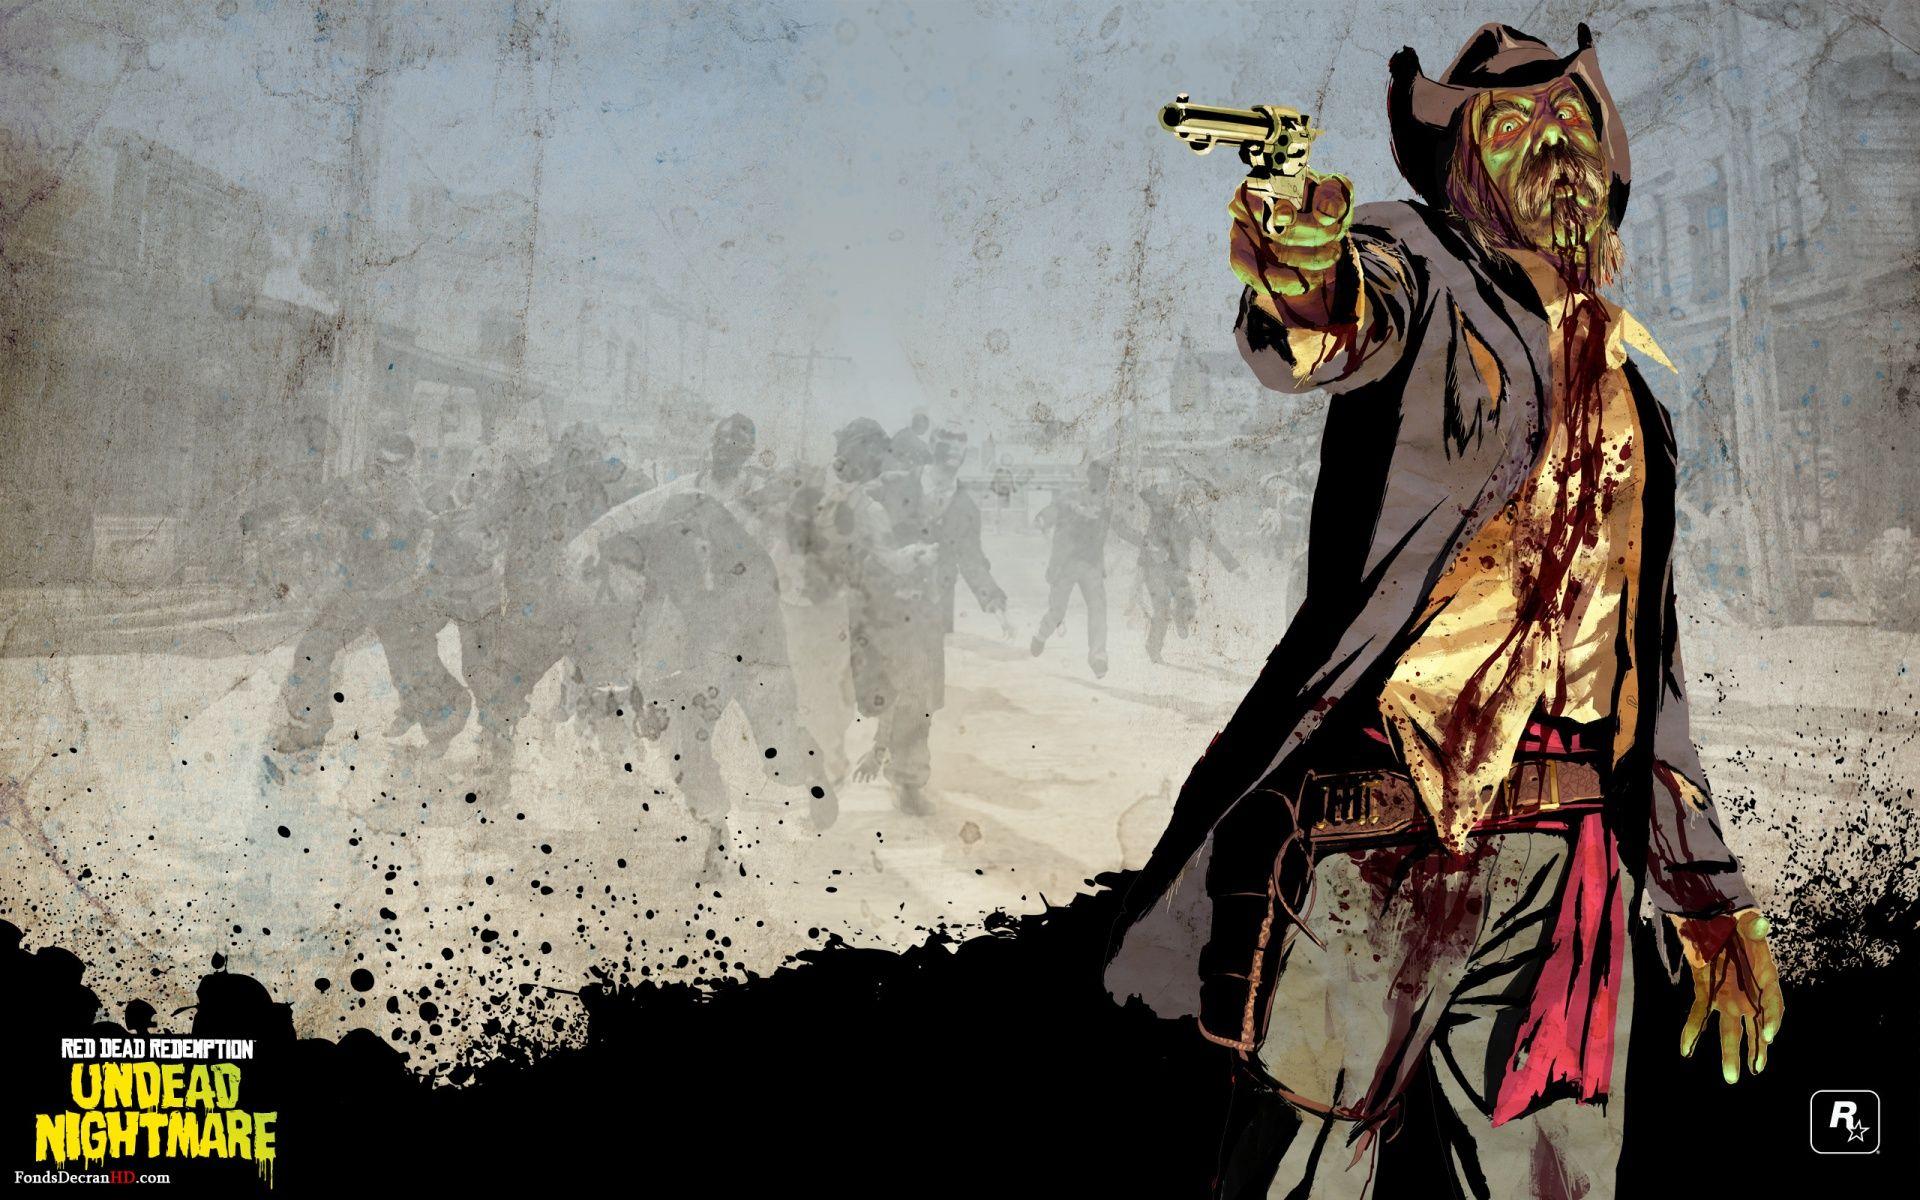 Download Red Dead Redemption Undead Nightmare Wallpaper HD High